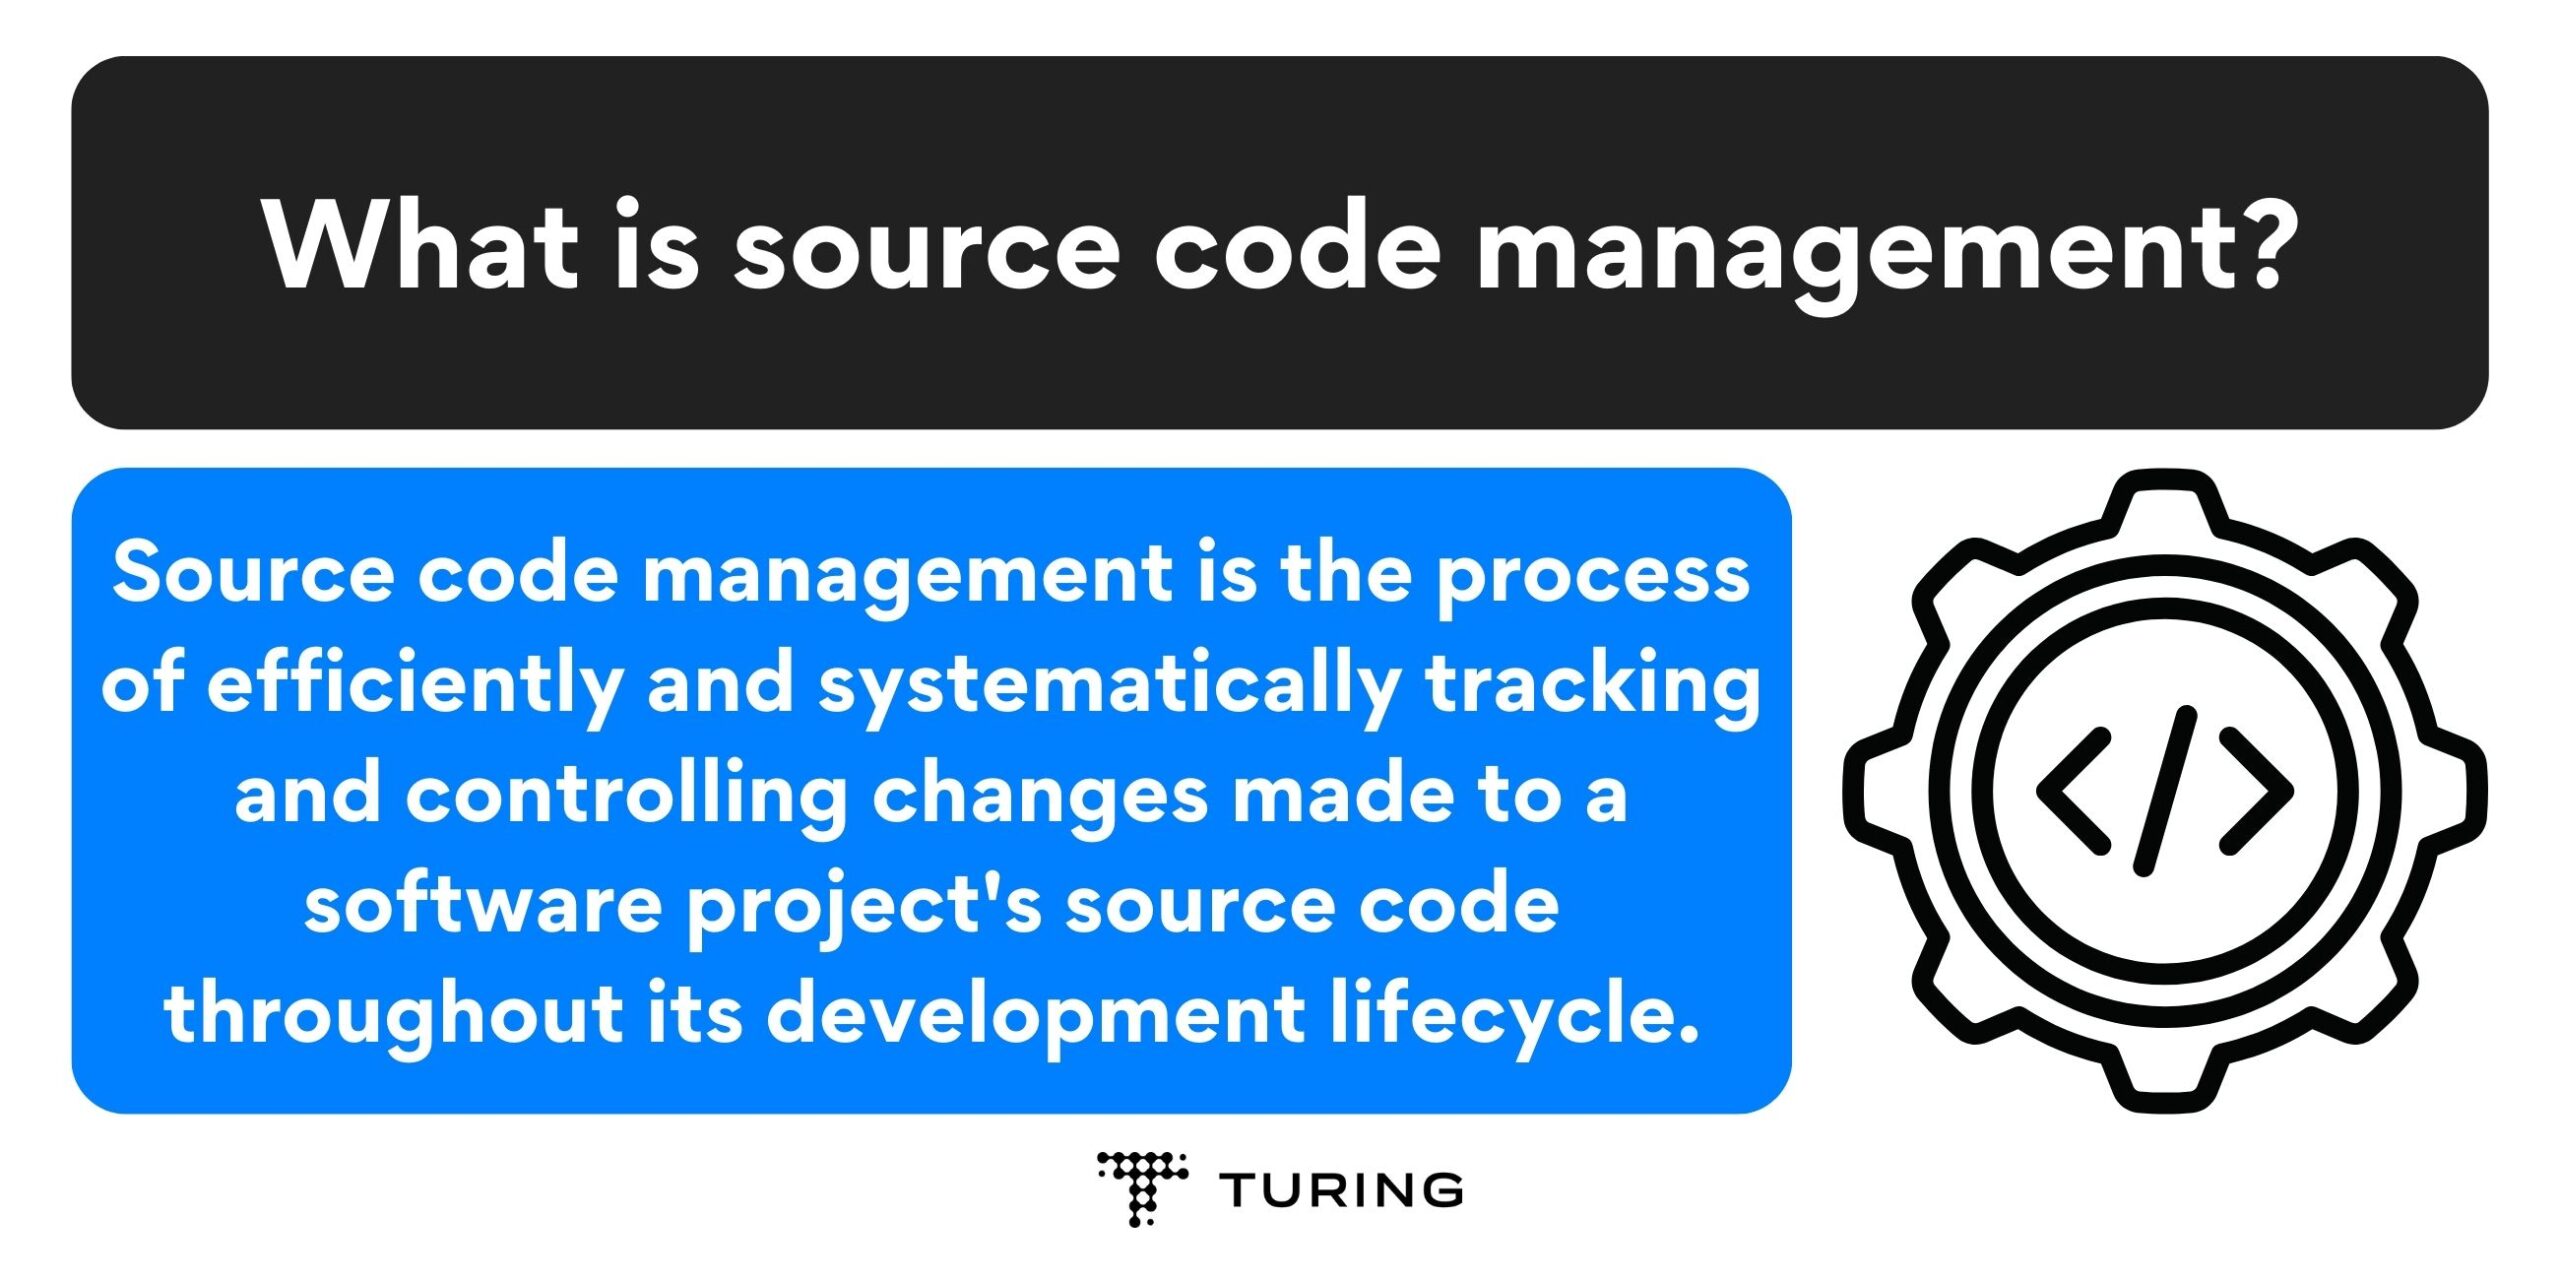 What is source code management?